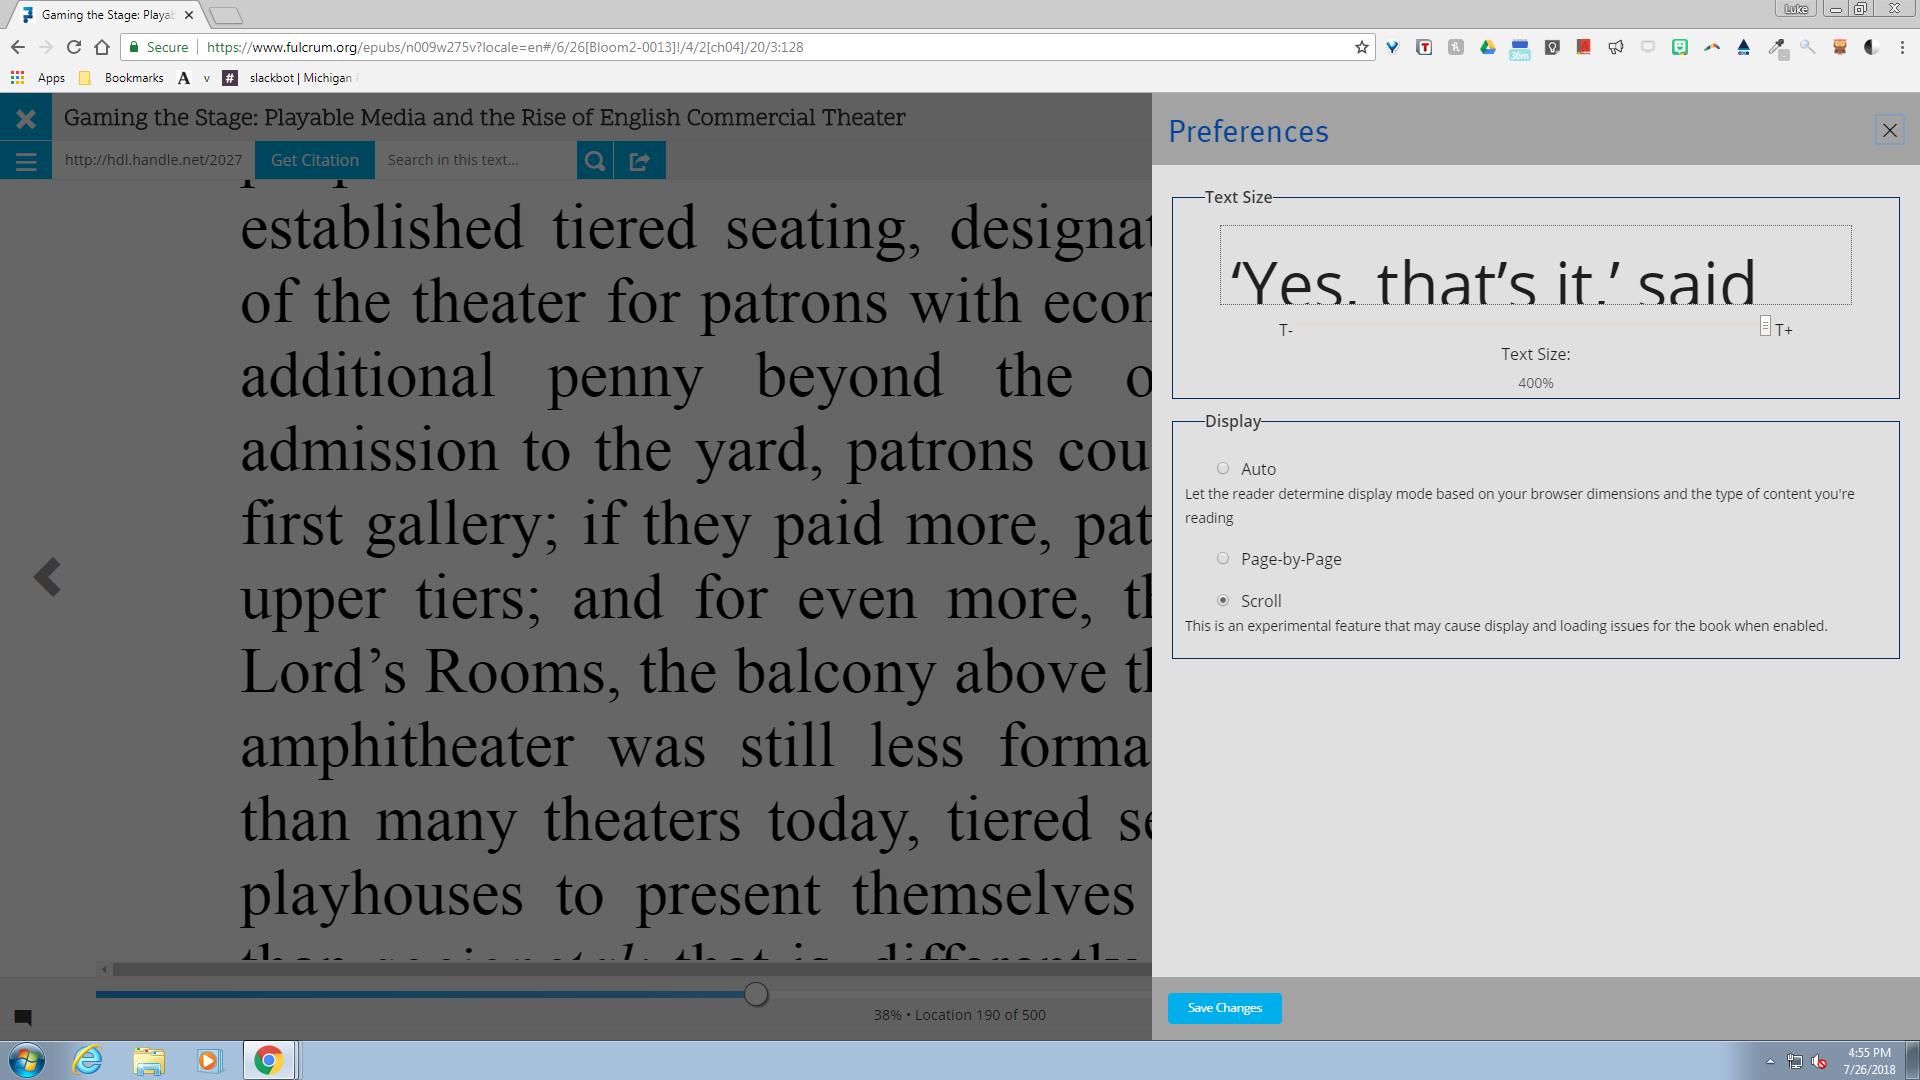 A screenshot of E-Reader preferences panel with text size increase/decrease options.